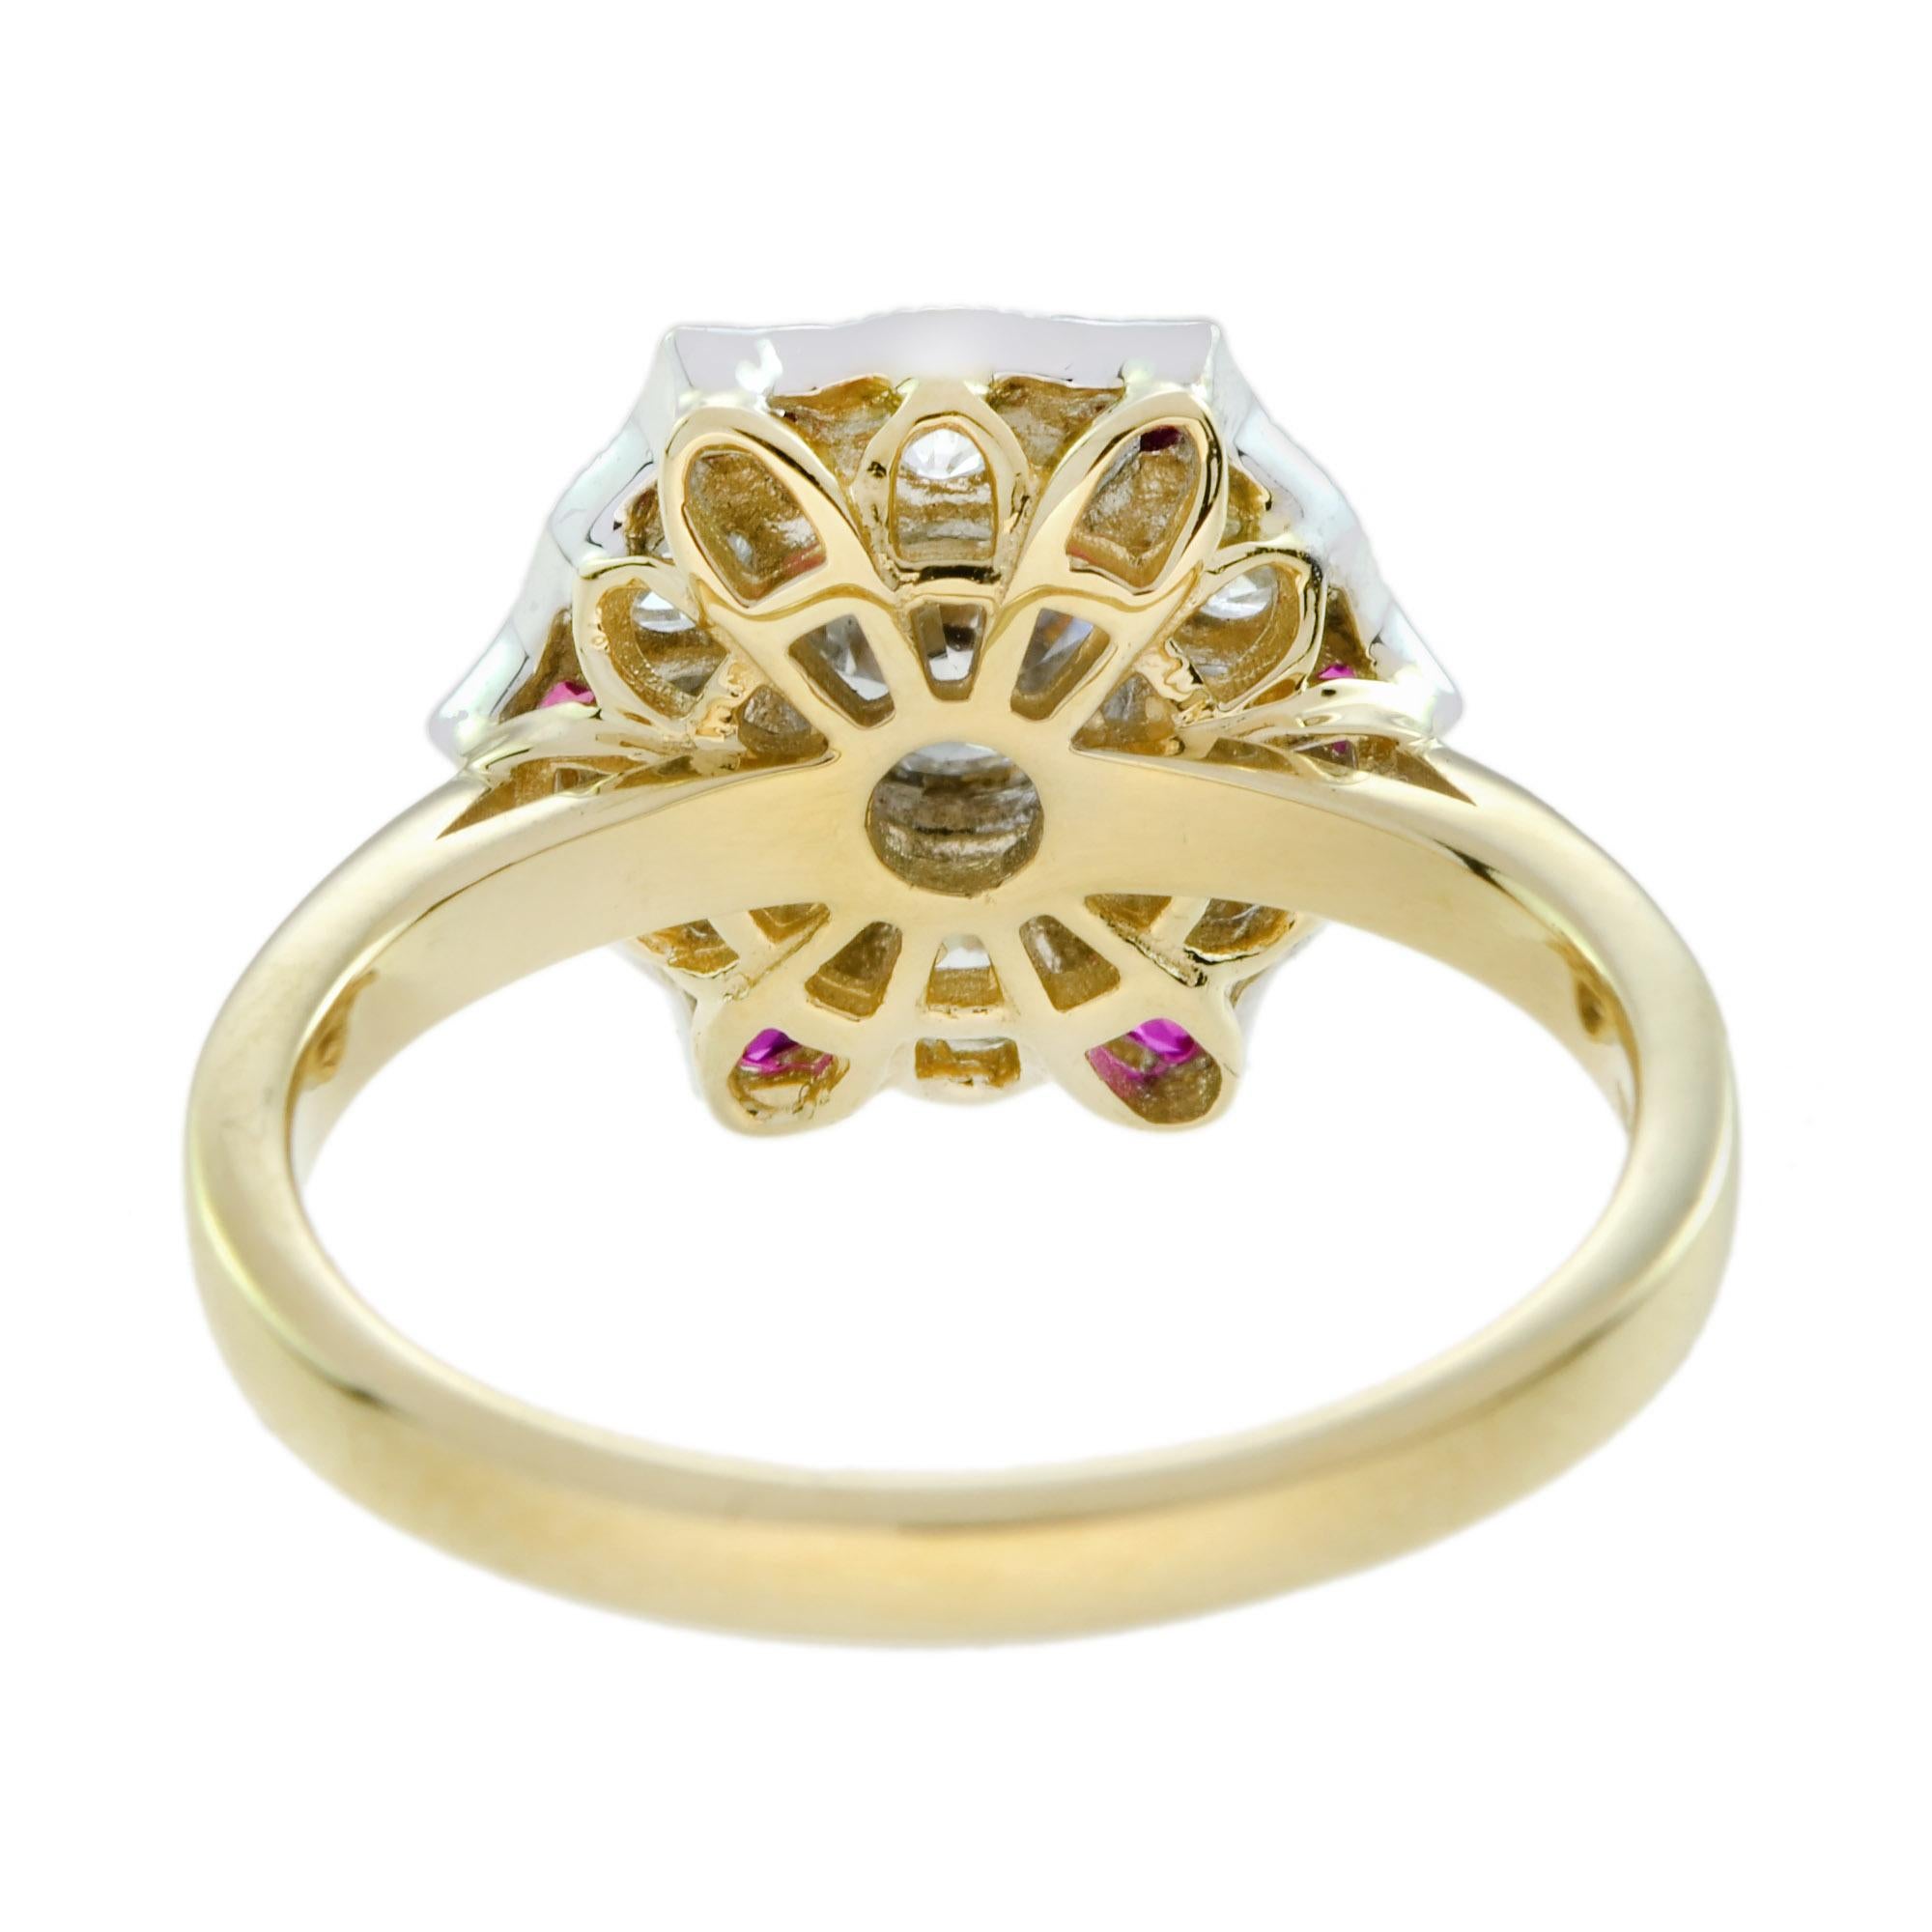 For Sale:  Diamond and Ruby Antique Style Floral Ring in 18k White Top Yellow Gold 6